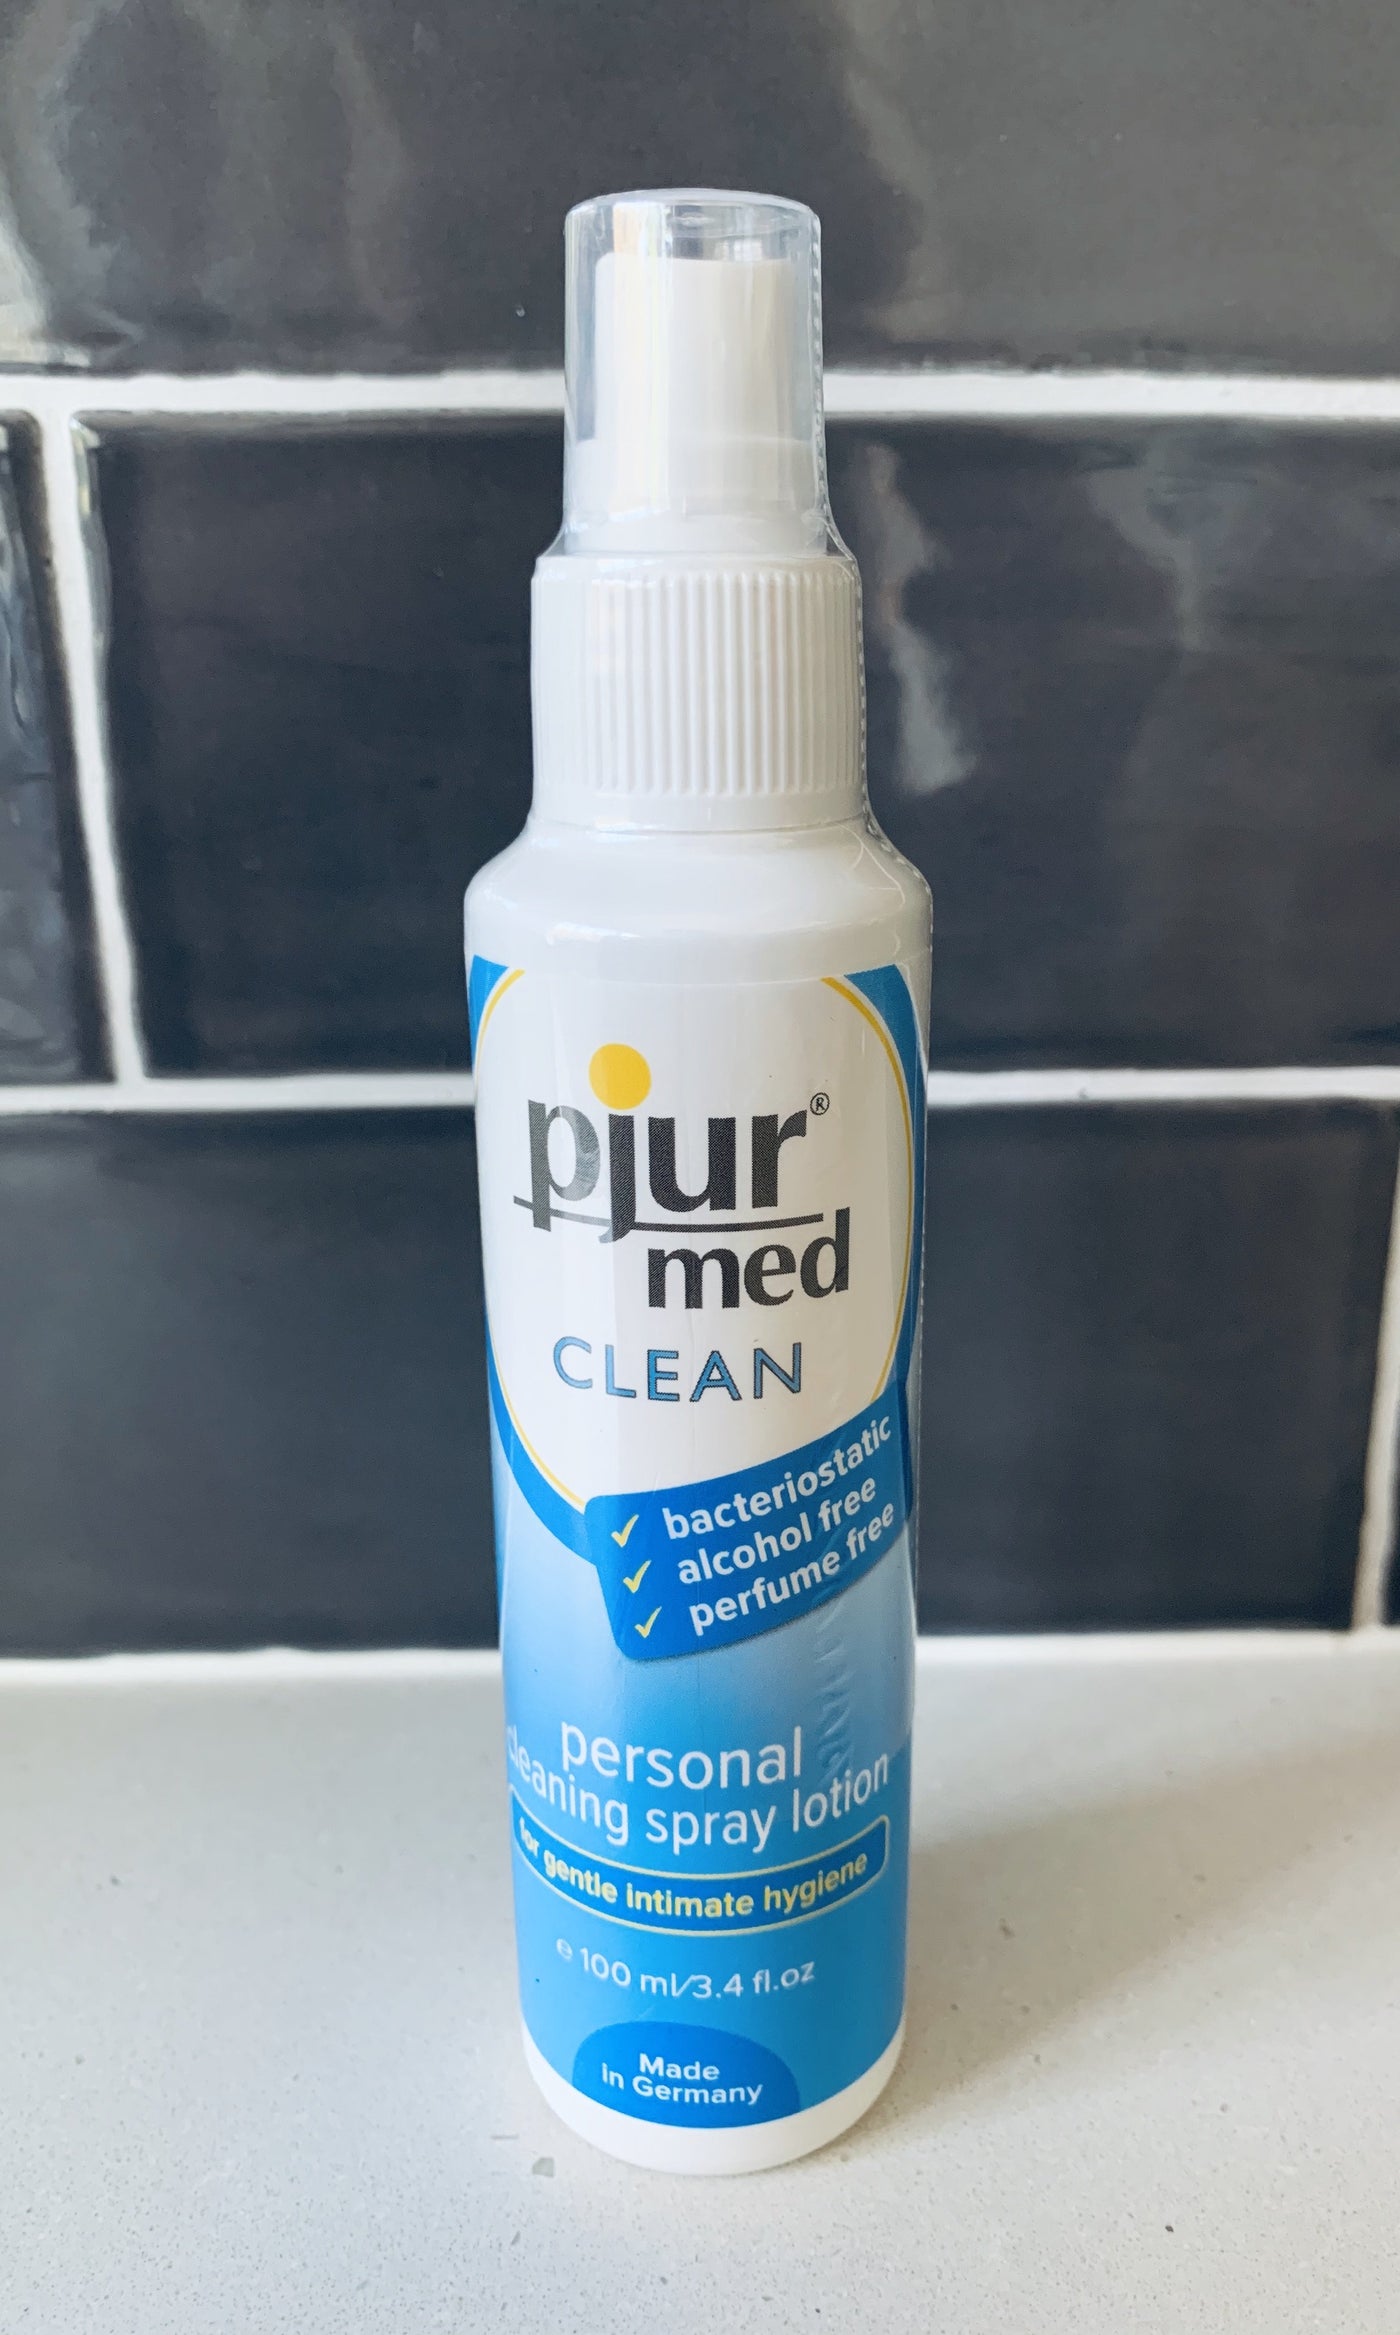 pjur®med CLEAN  personal cleaning spray lotion 100mL